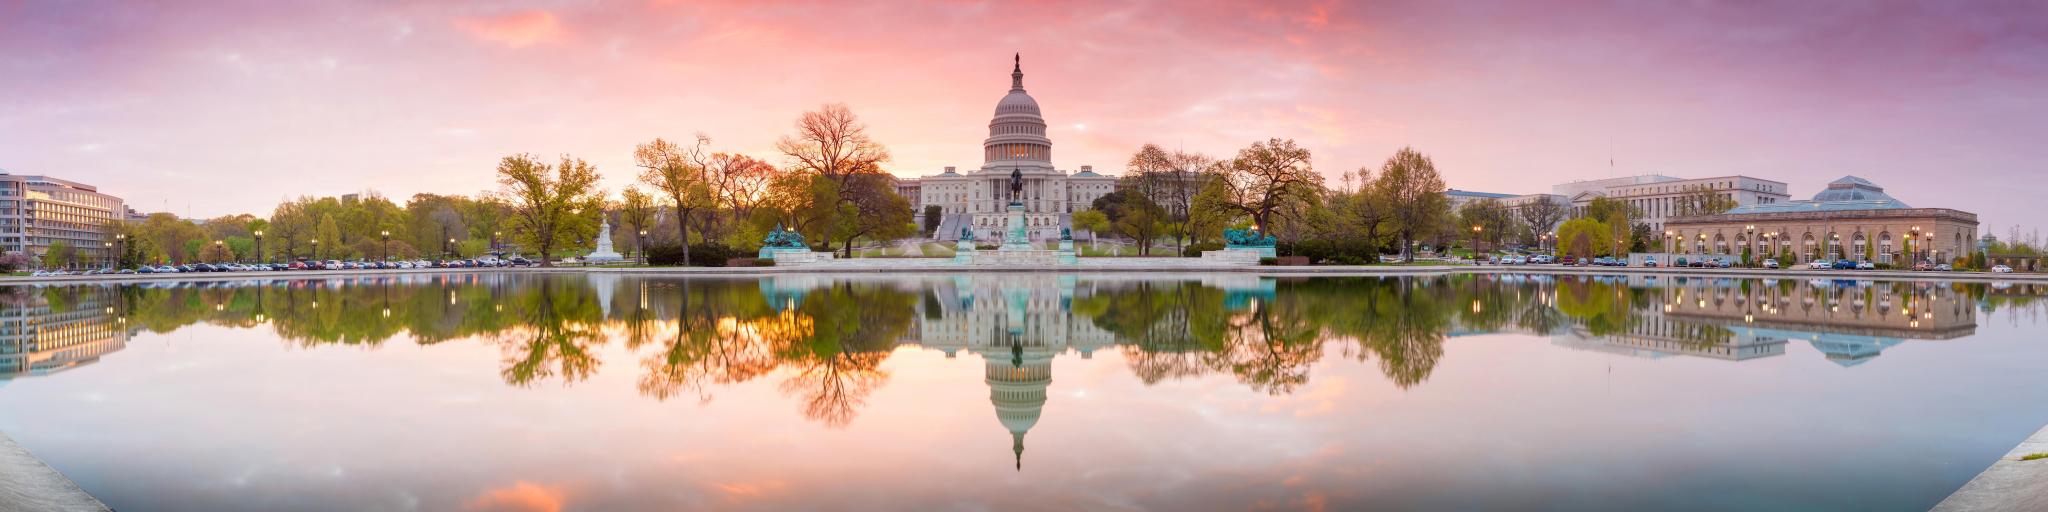 Washington DC, USA with a panorama view of The United States Capitol building taken at sunrise and reflecting in the lake in the foreground.